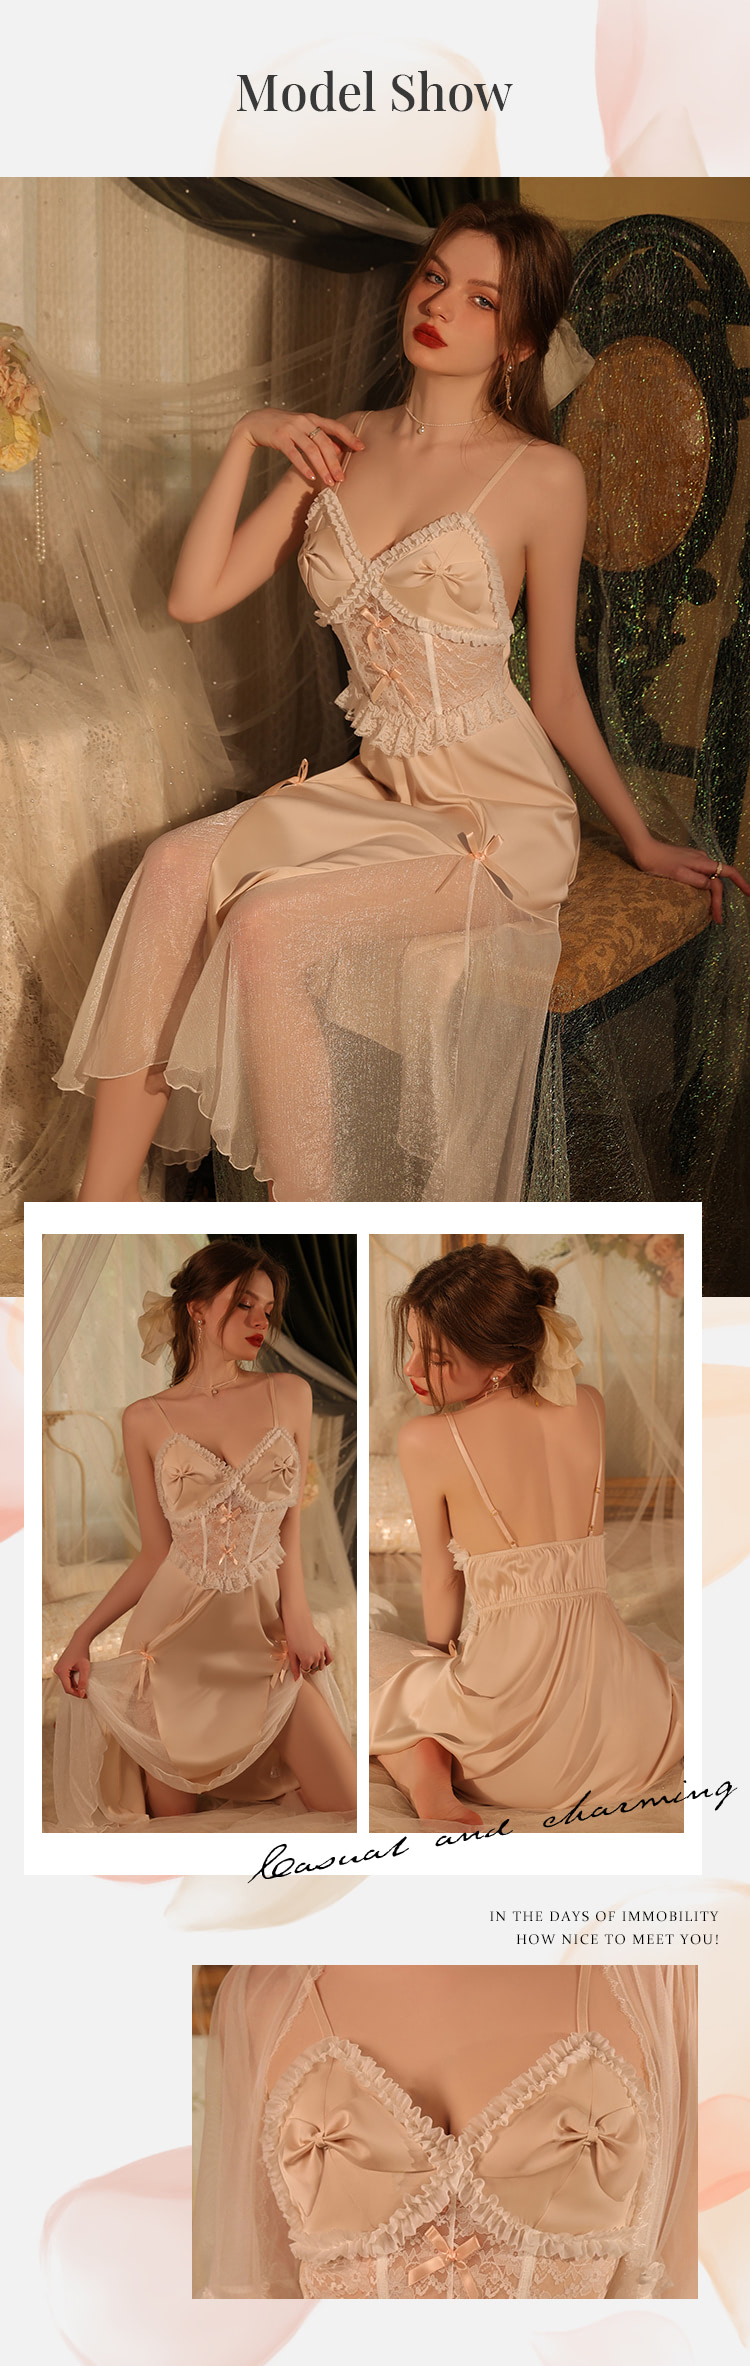 Deep-V-Neck-Open-Back-Lace-Satin-Tulle-Strap-Nightgown-Sleepwear11